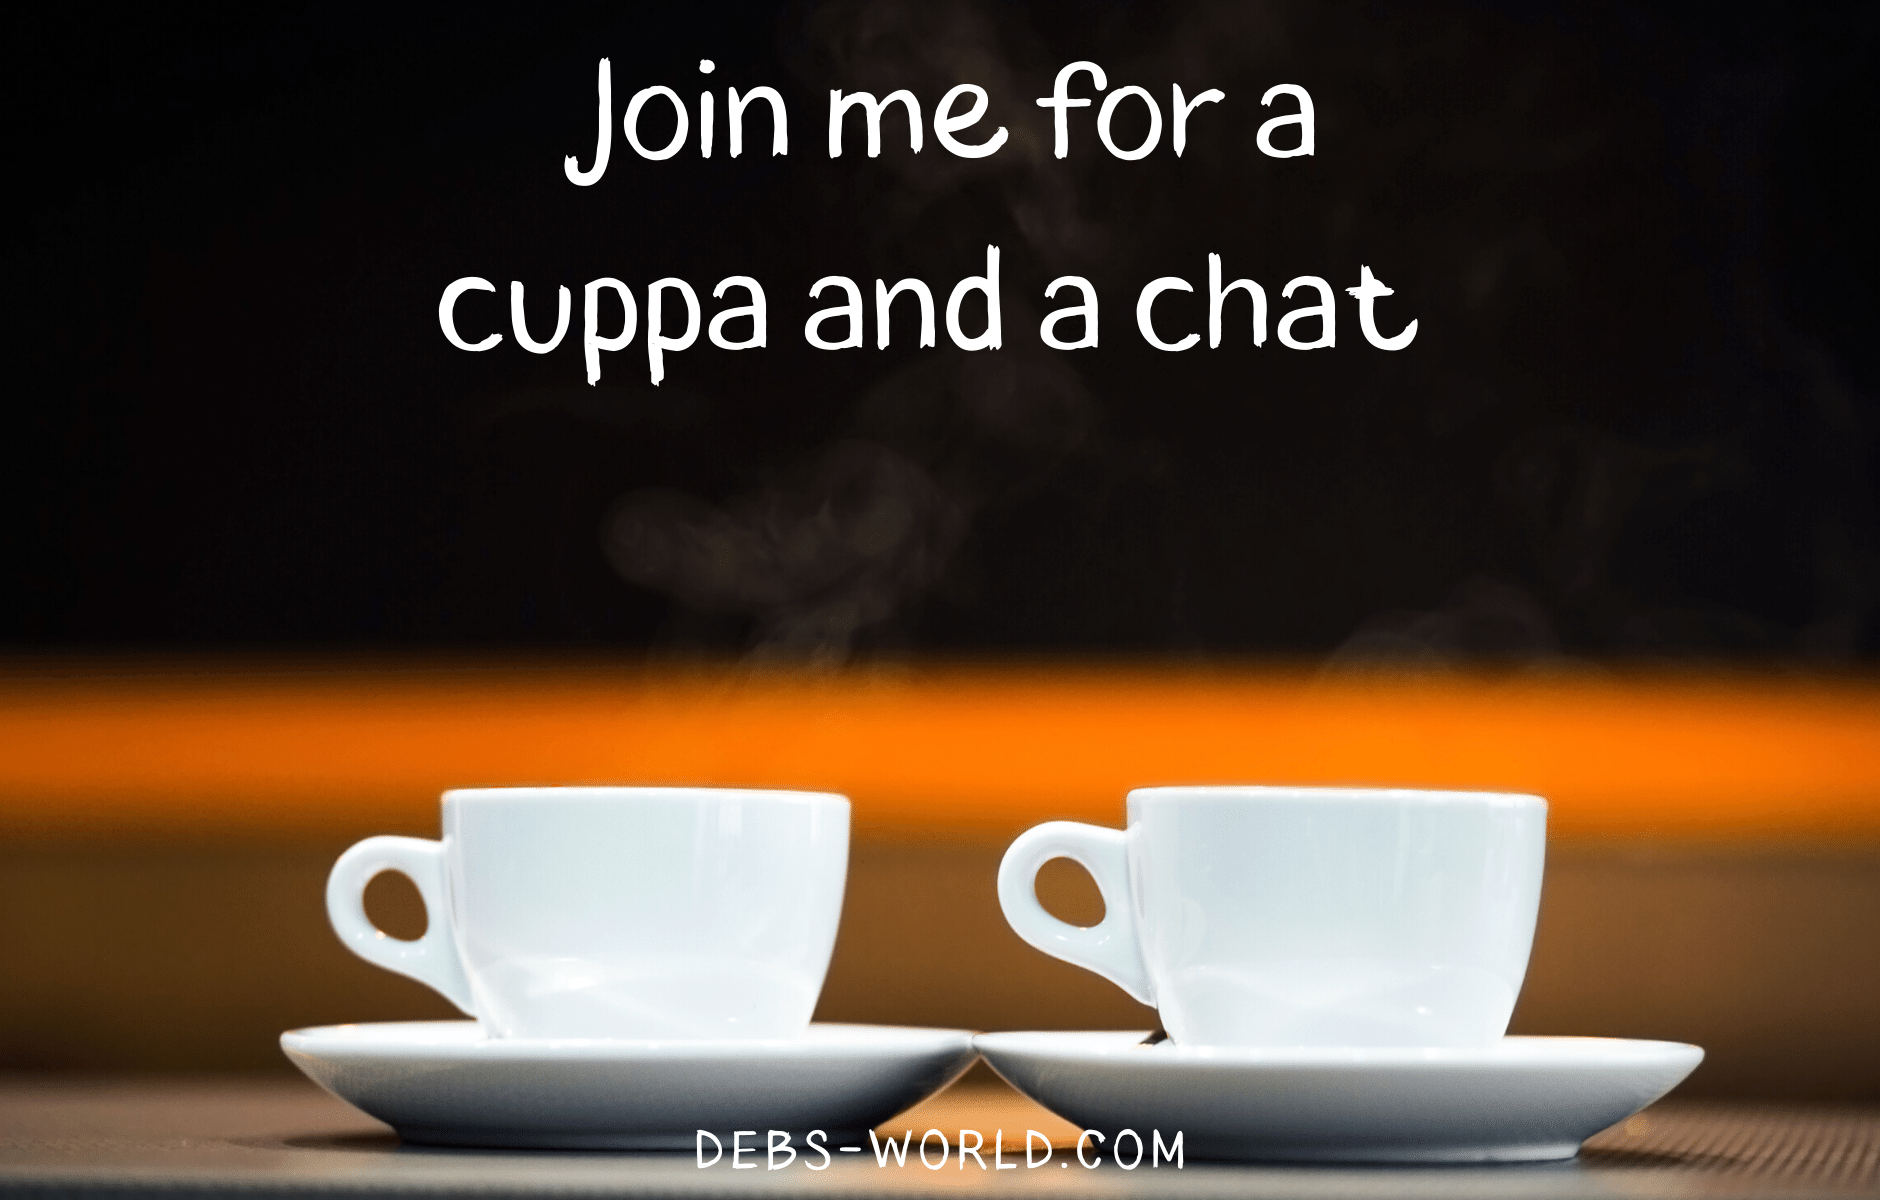 Cuppa and a chat